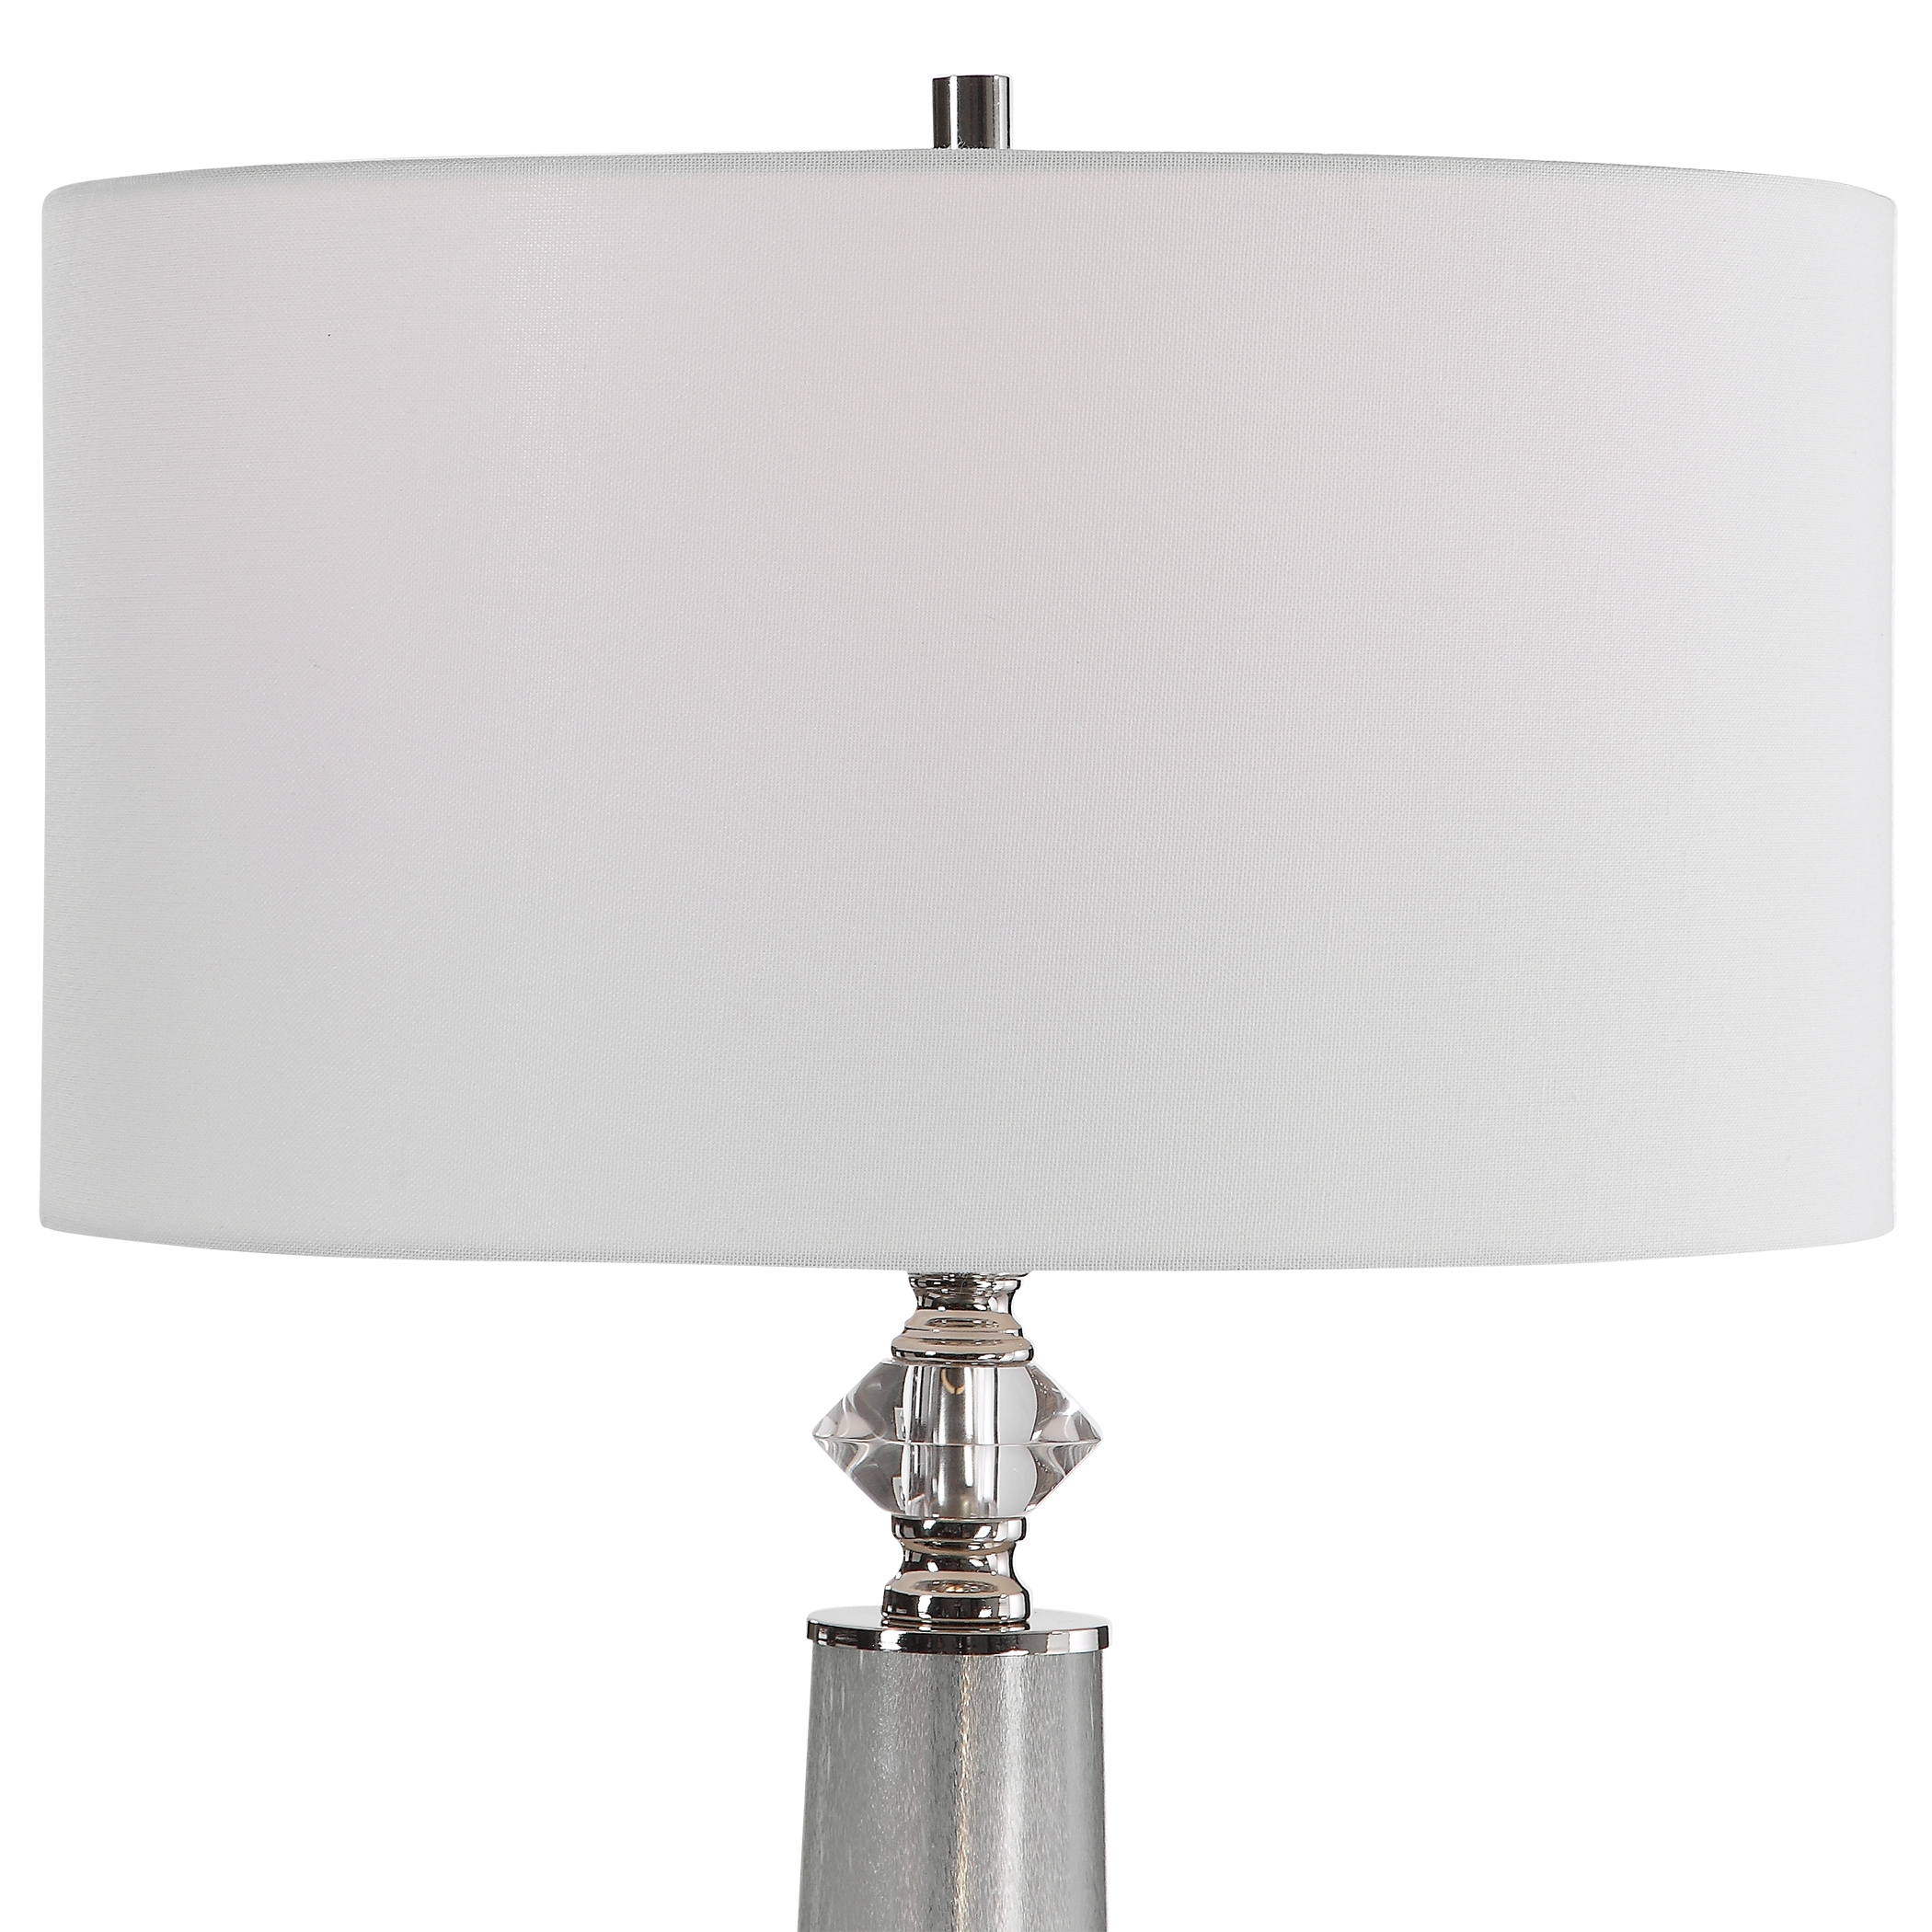 Grayton Frosted Art Table Lamp - Image 3